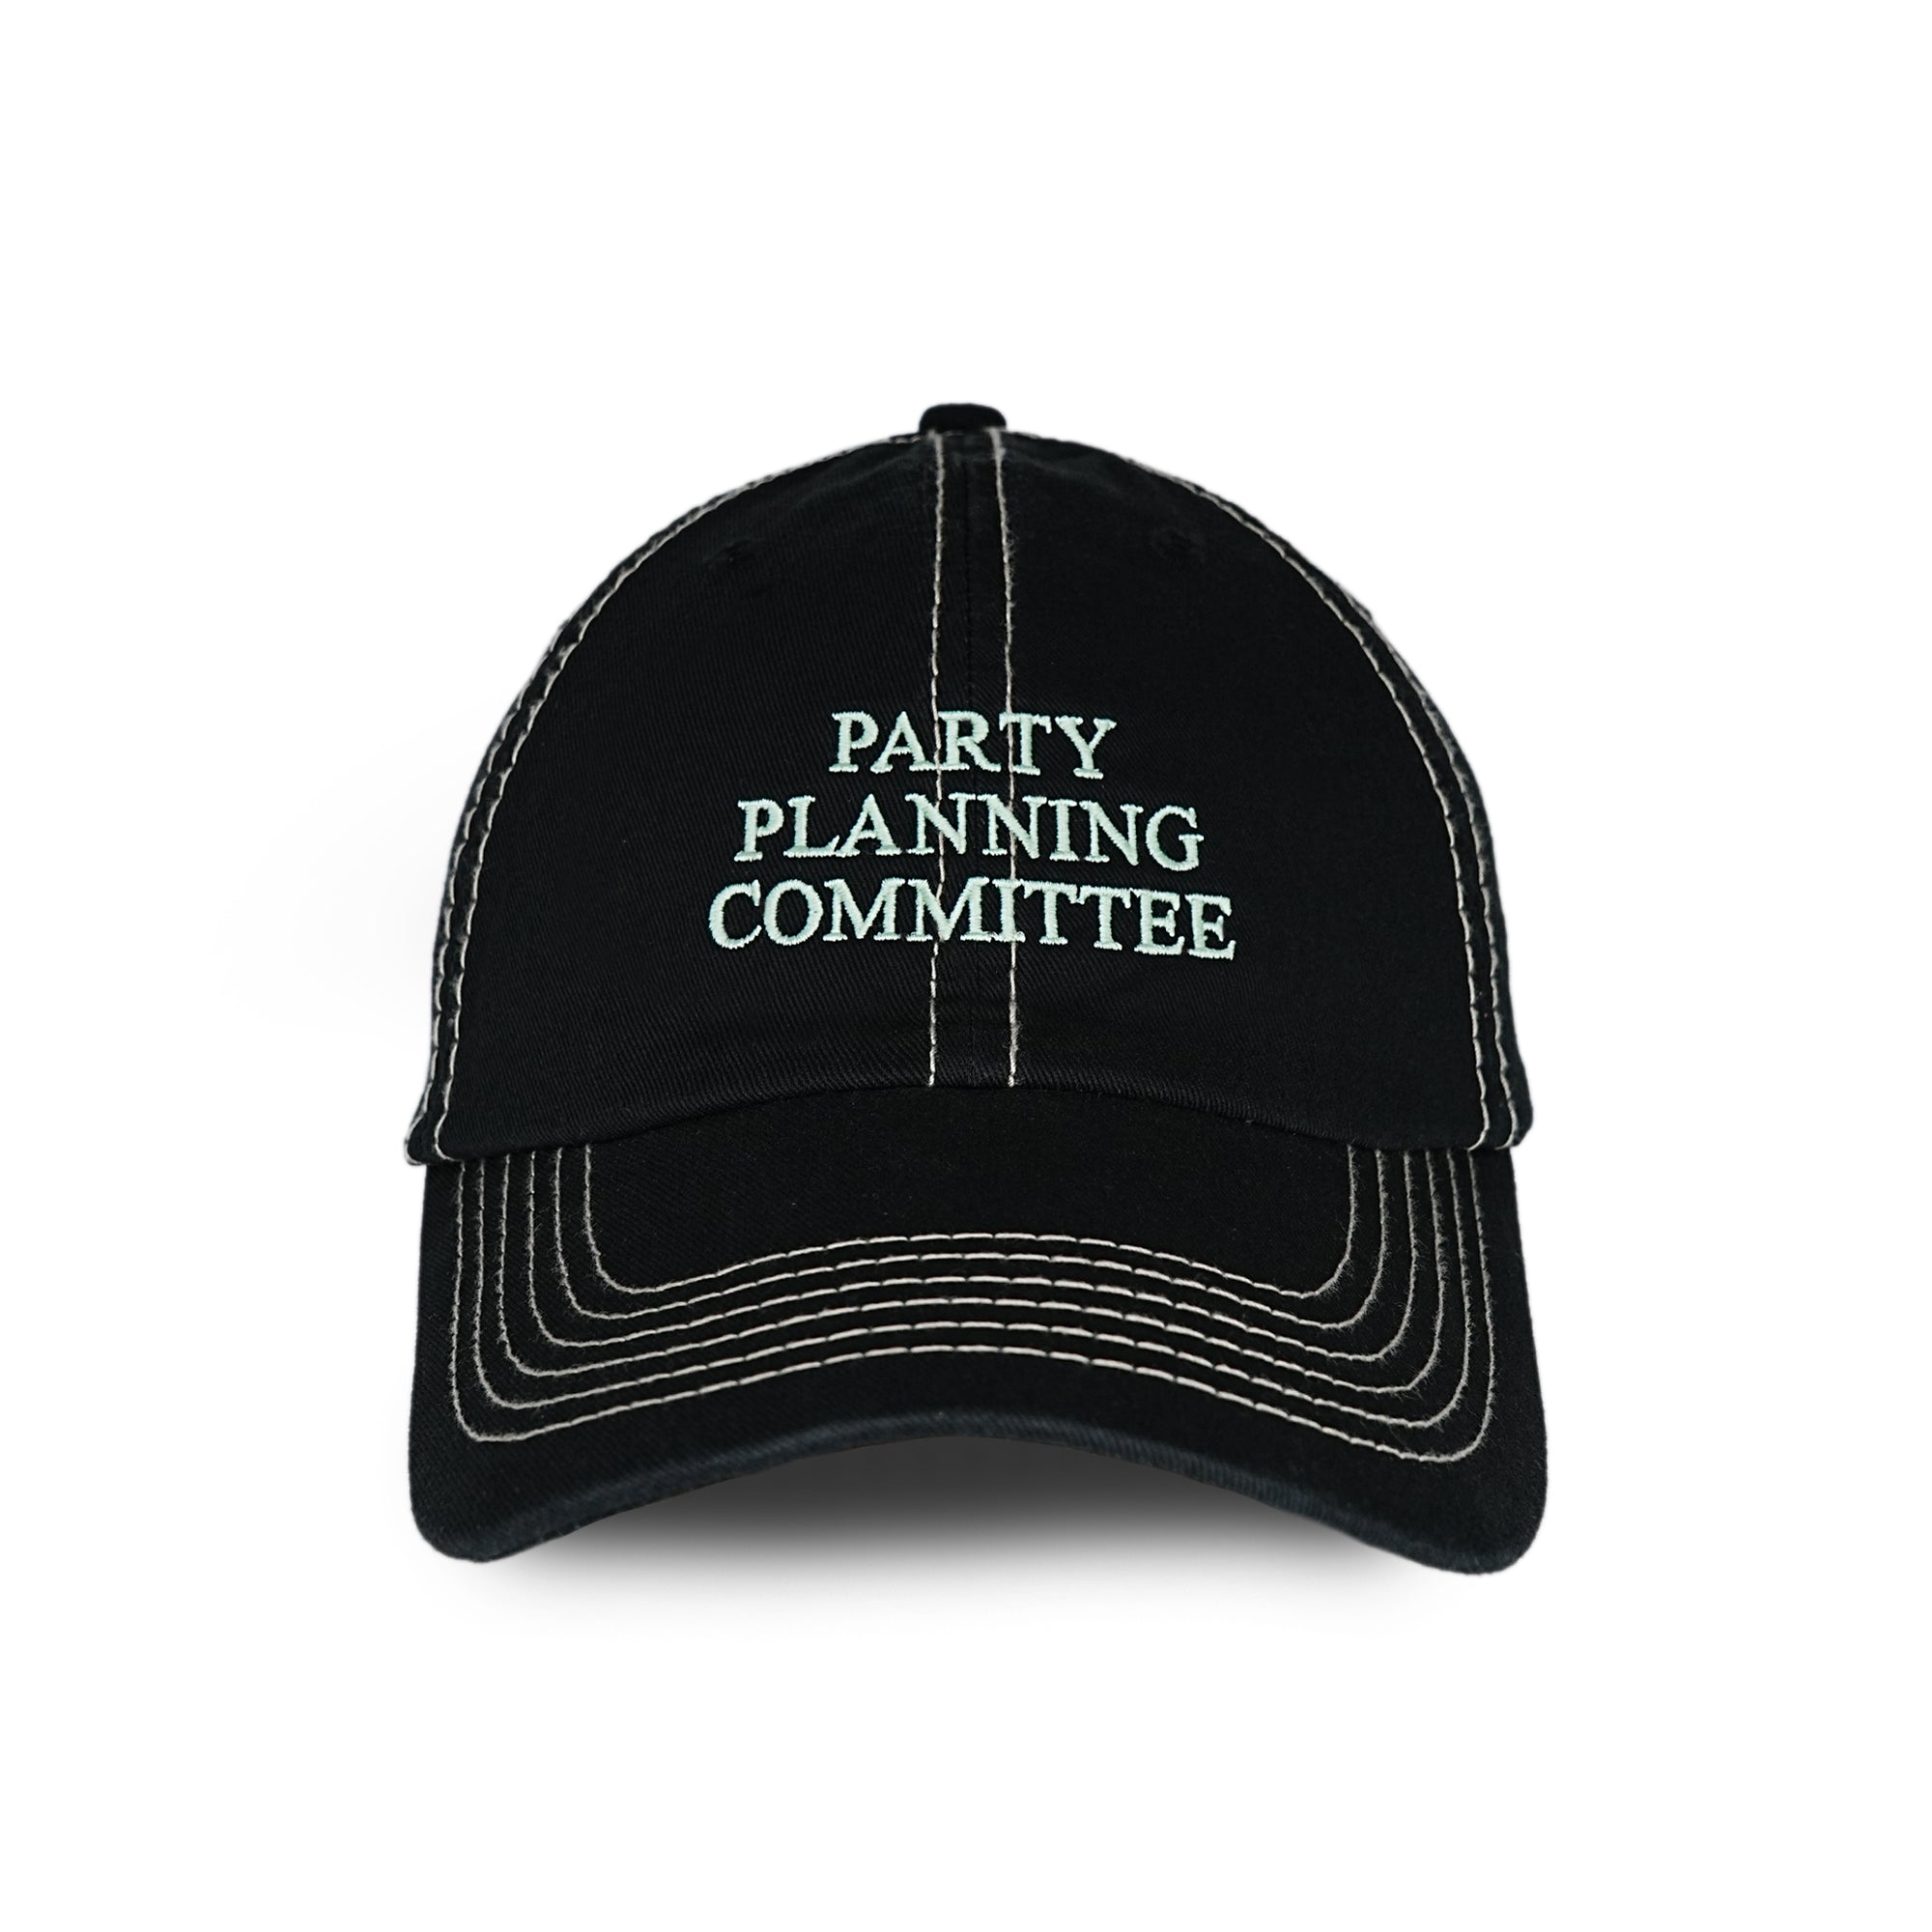 PARTY PLANNING COMMITTEE